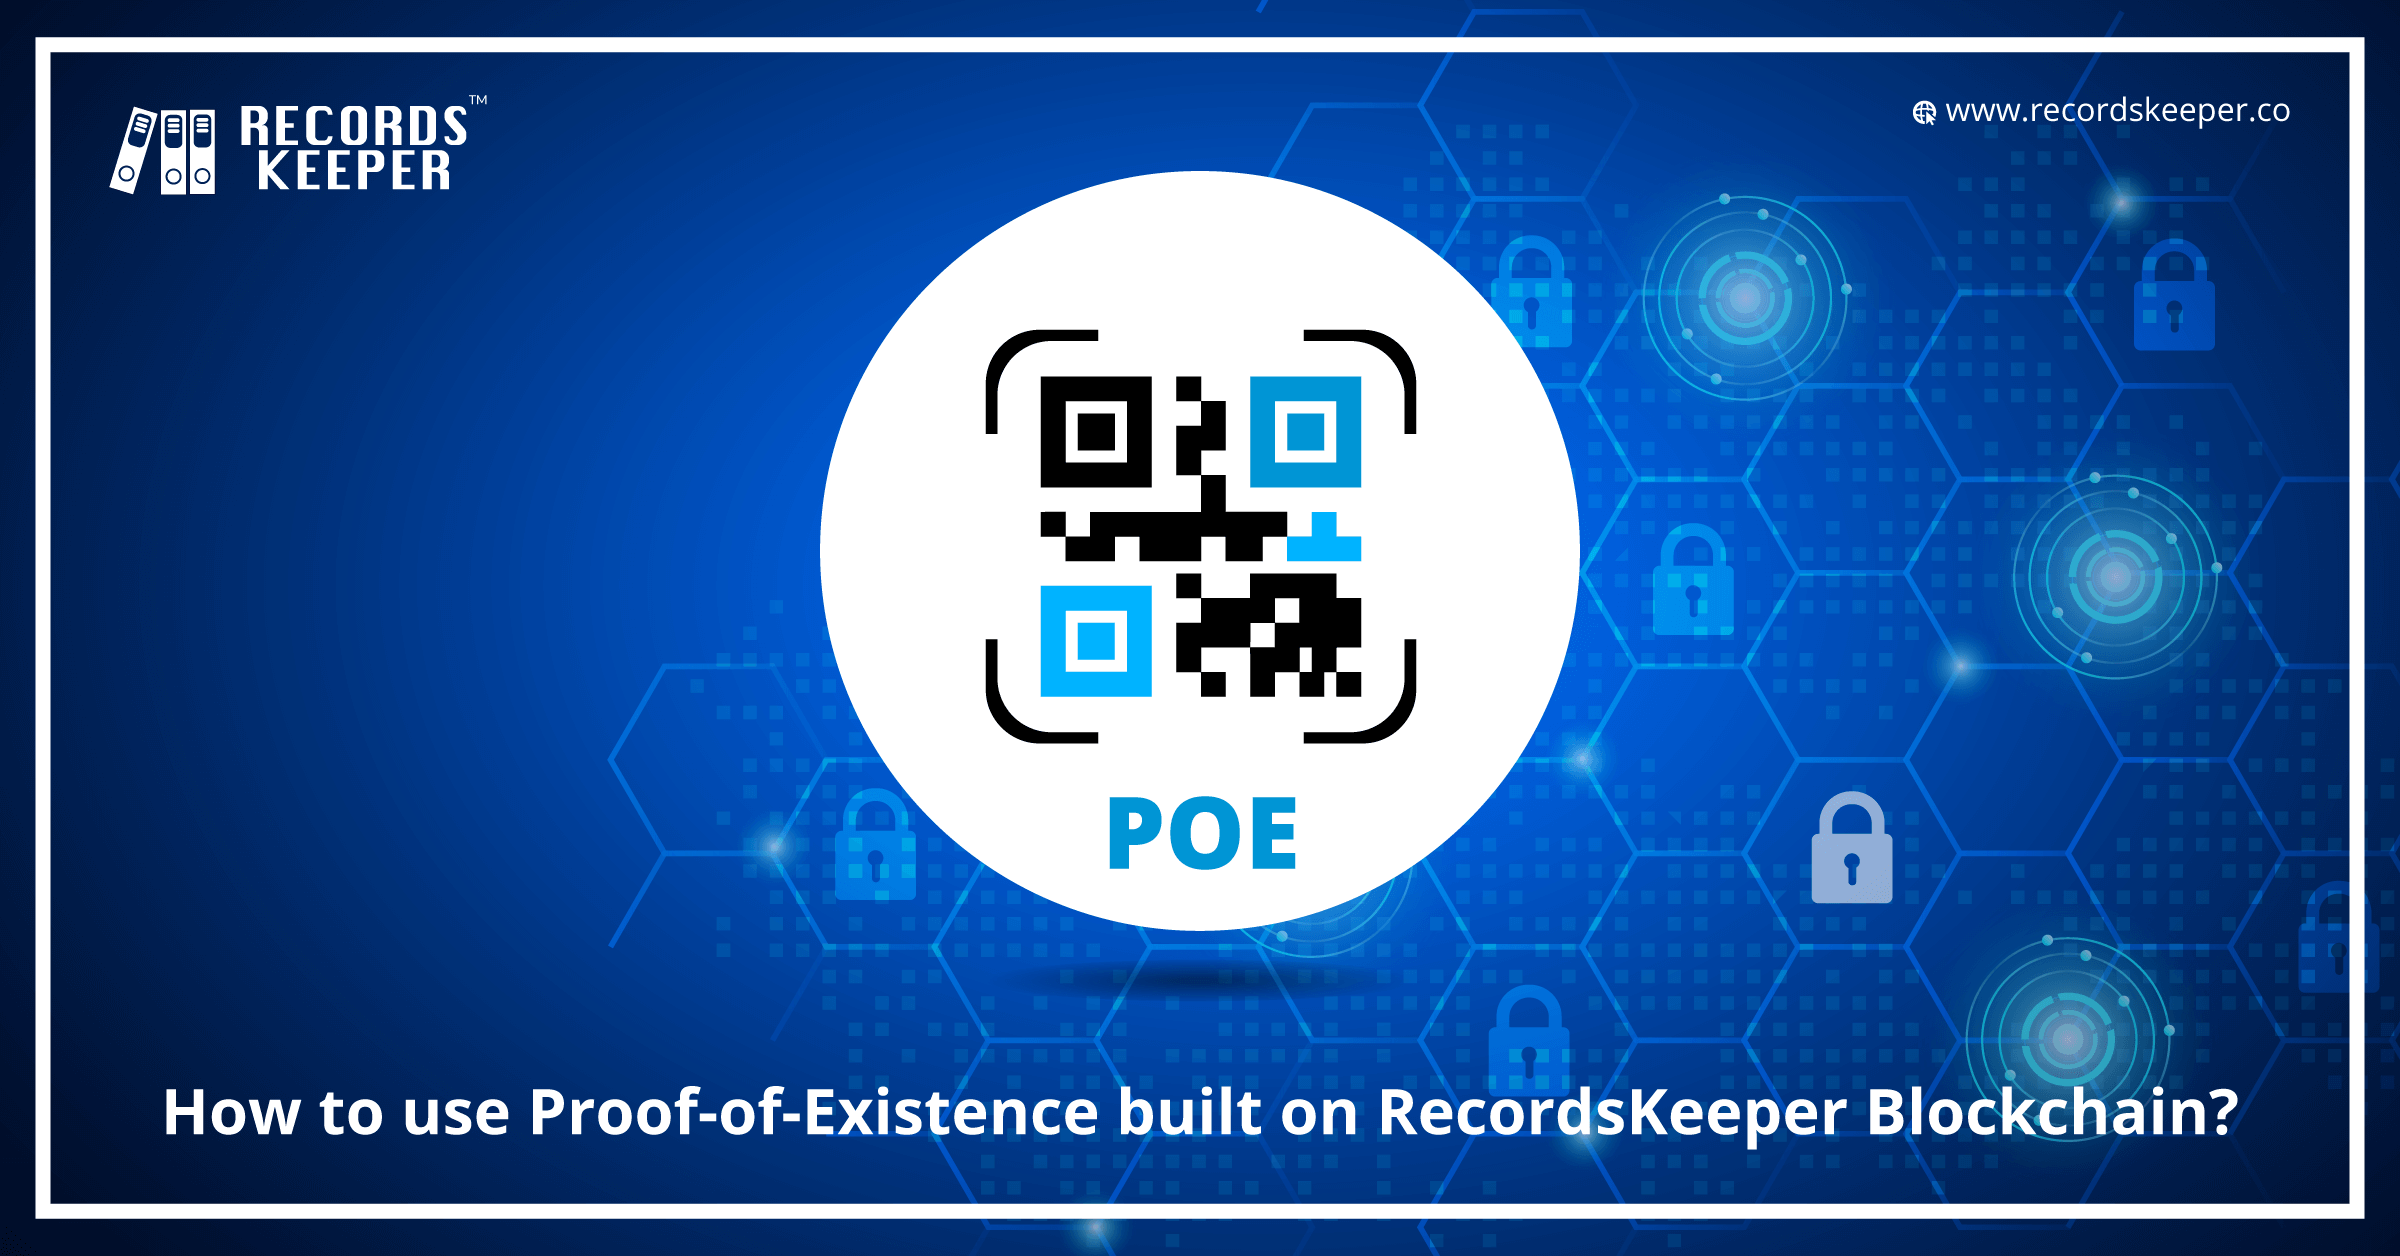 How to use Proof-of-Existence built on RecordsKeeper Blockchain?